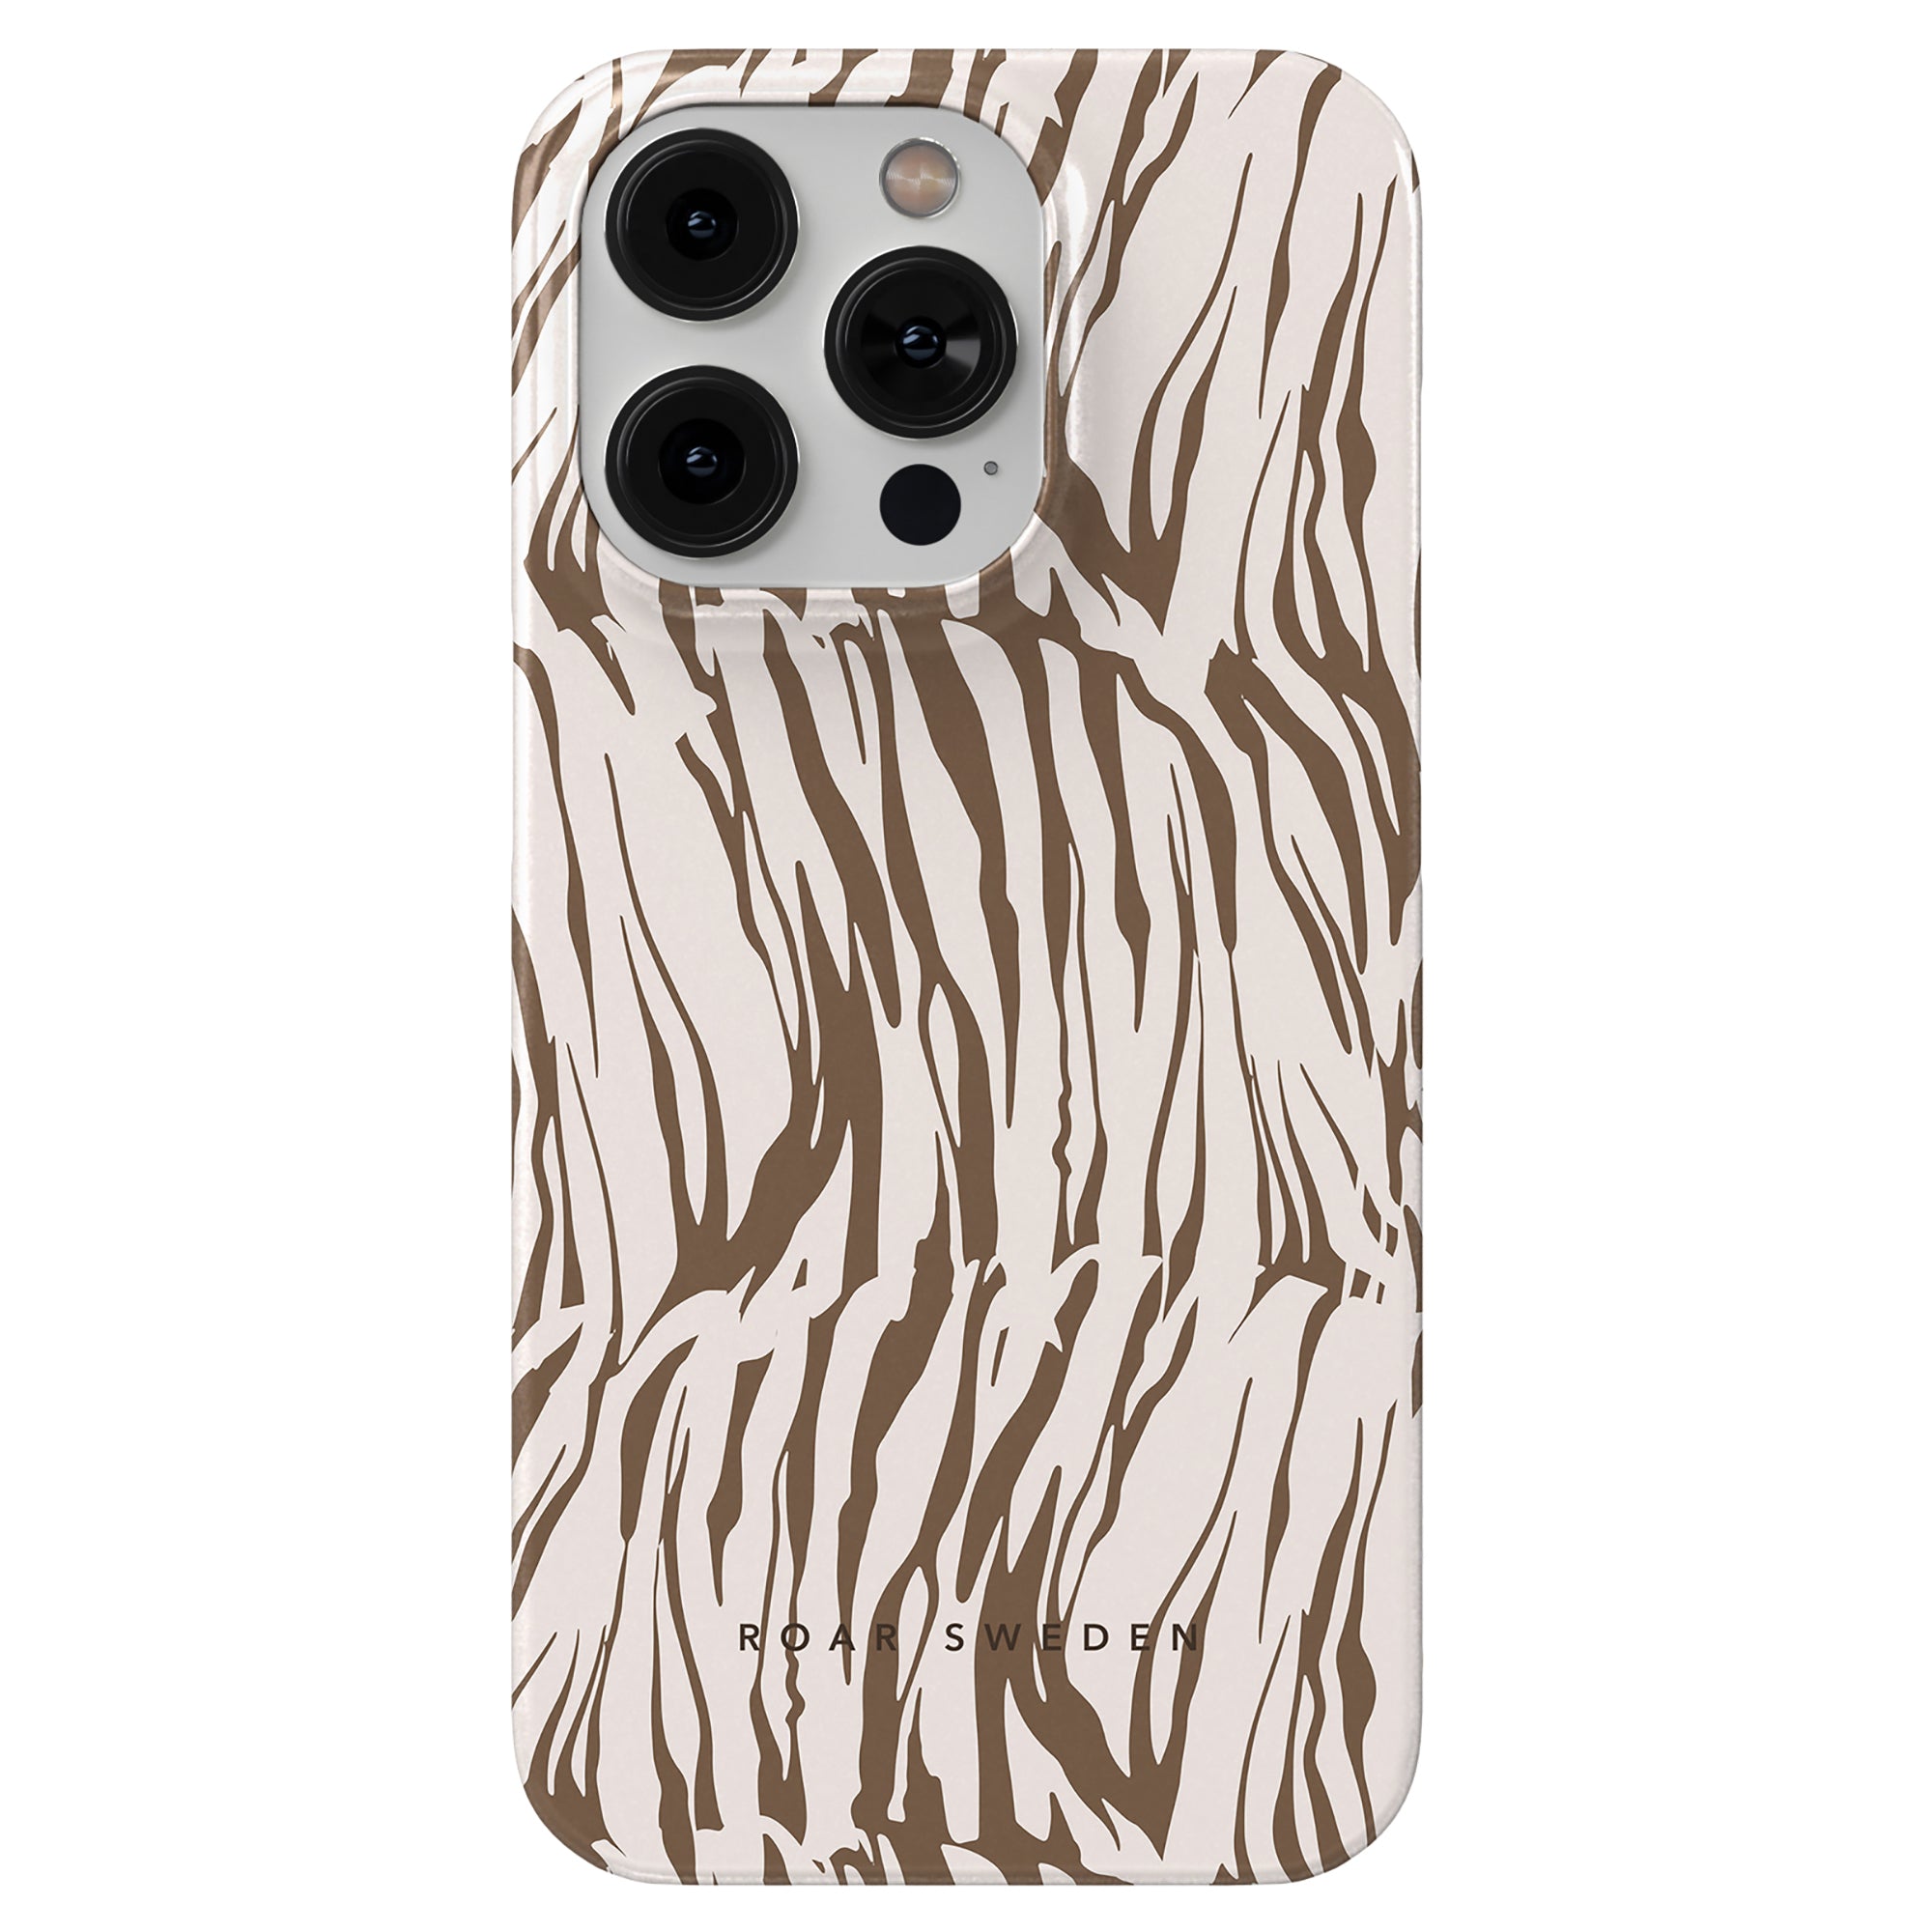 A White Tiger - Slim case with a zebra stripe pattern design, perfect for adding a touch of office comfort.